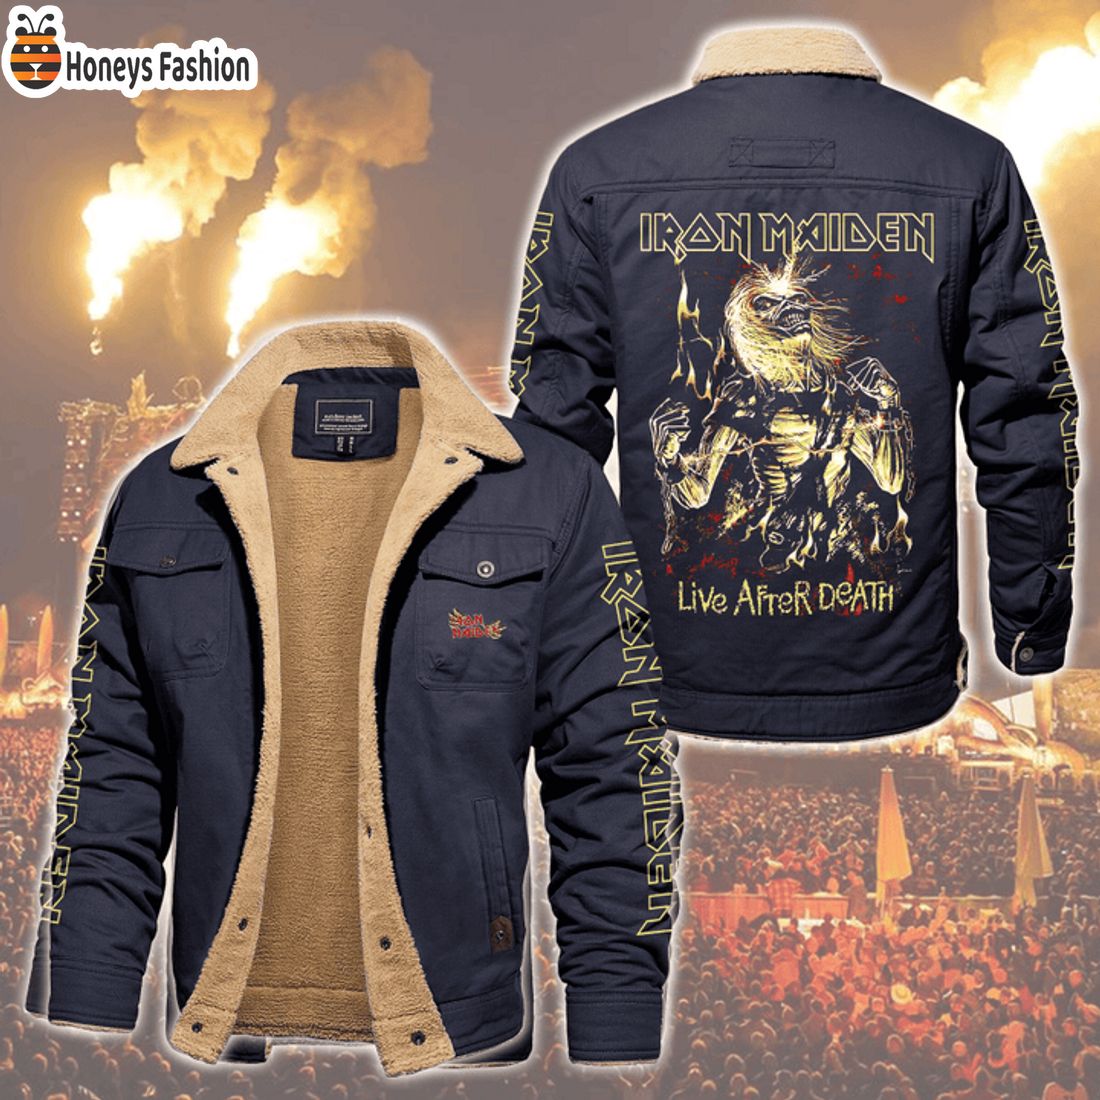 HOT Iron Maiden Live After Death Fleece Leather Jacket